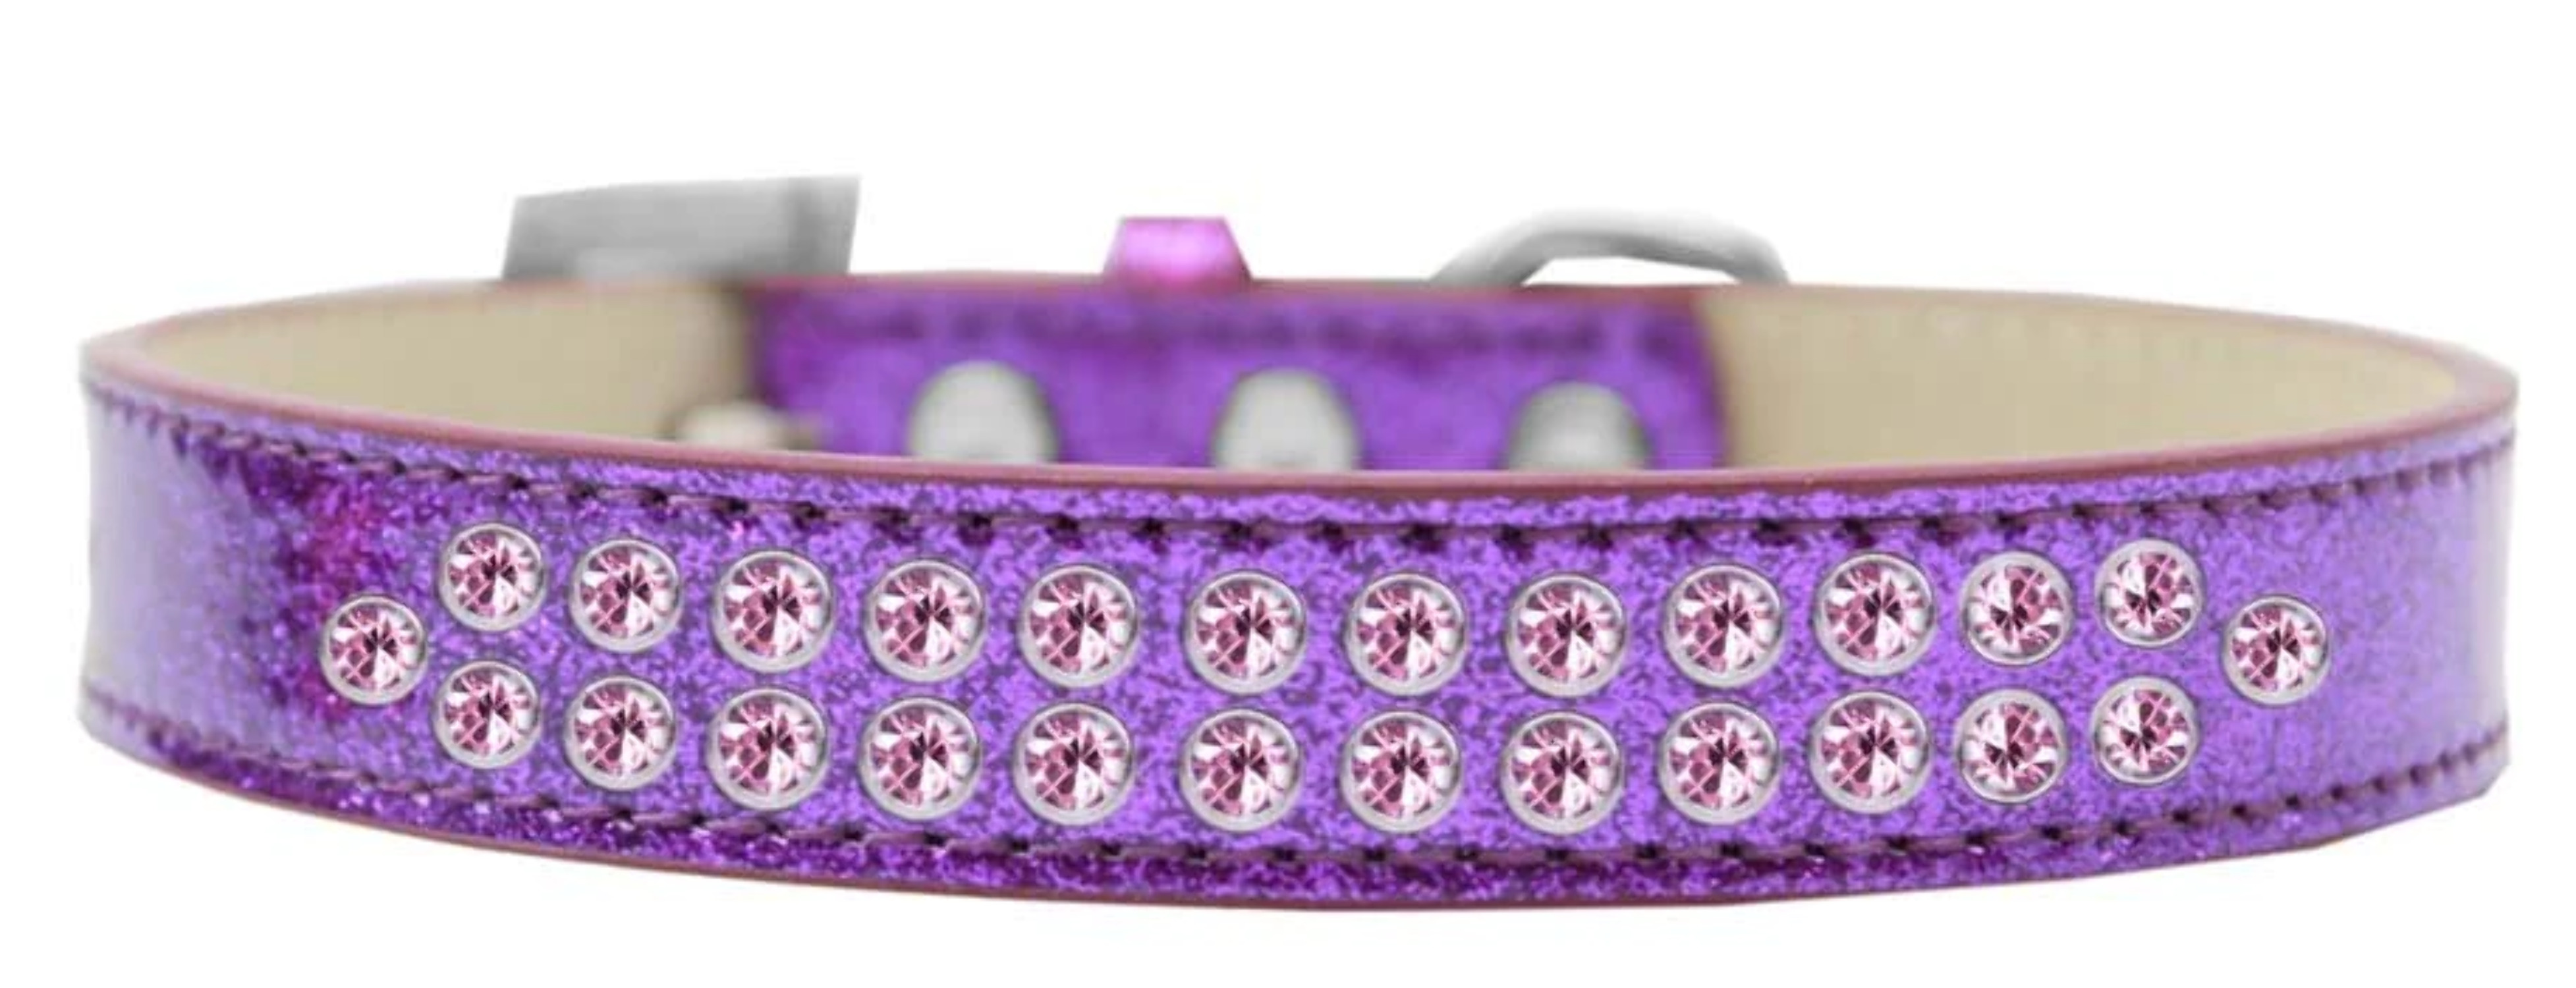 Mirage Pet Products614-06 BK-12 Two Row Light Pink Crystal Dog Collar, Black Ice Cream - Size 12 - image 5 of 5